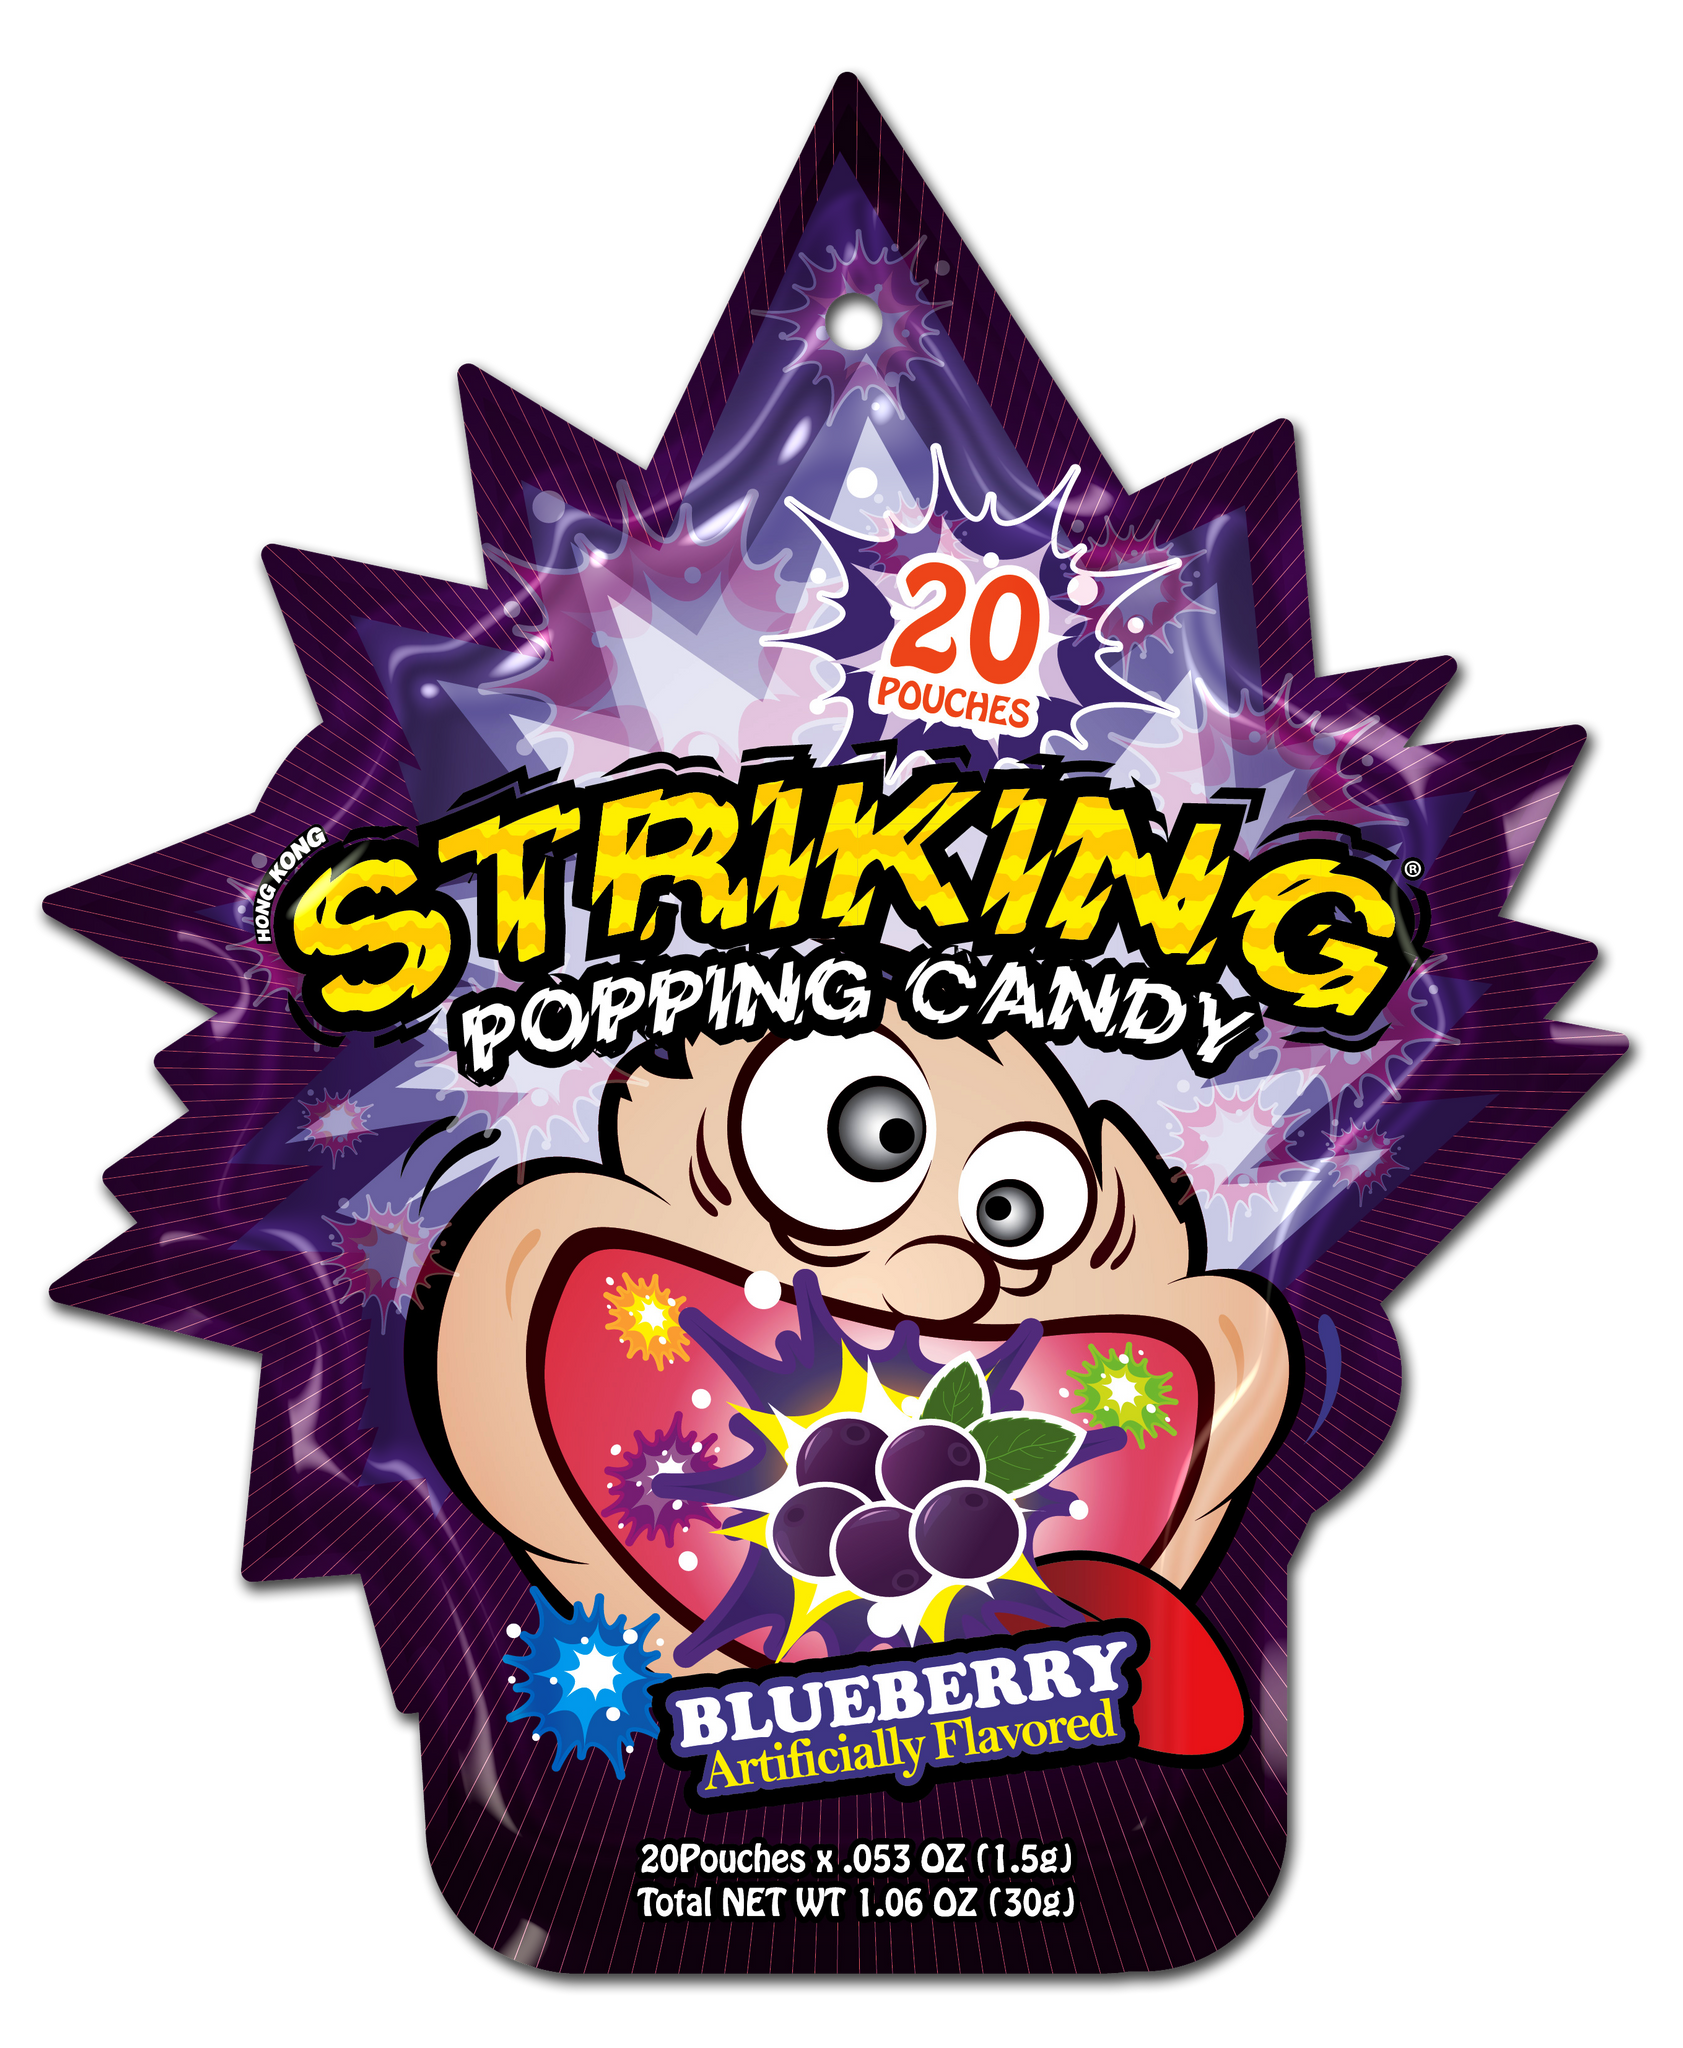 STRIKING POPPING CANDY BLUEBERRY (20 pack) 30G 索勁 爆炸糖藍莓味(20包) 30G